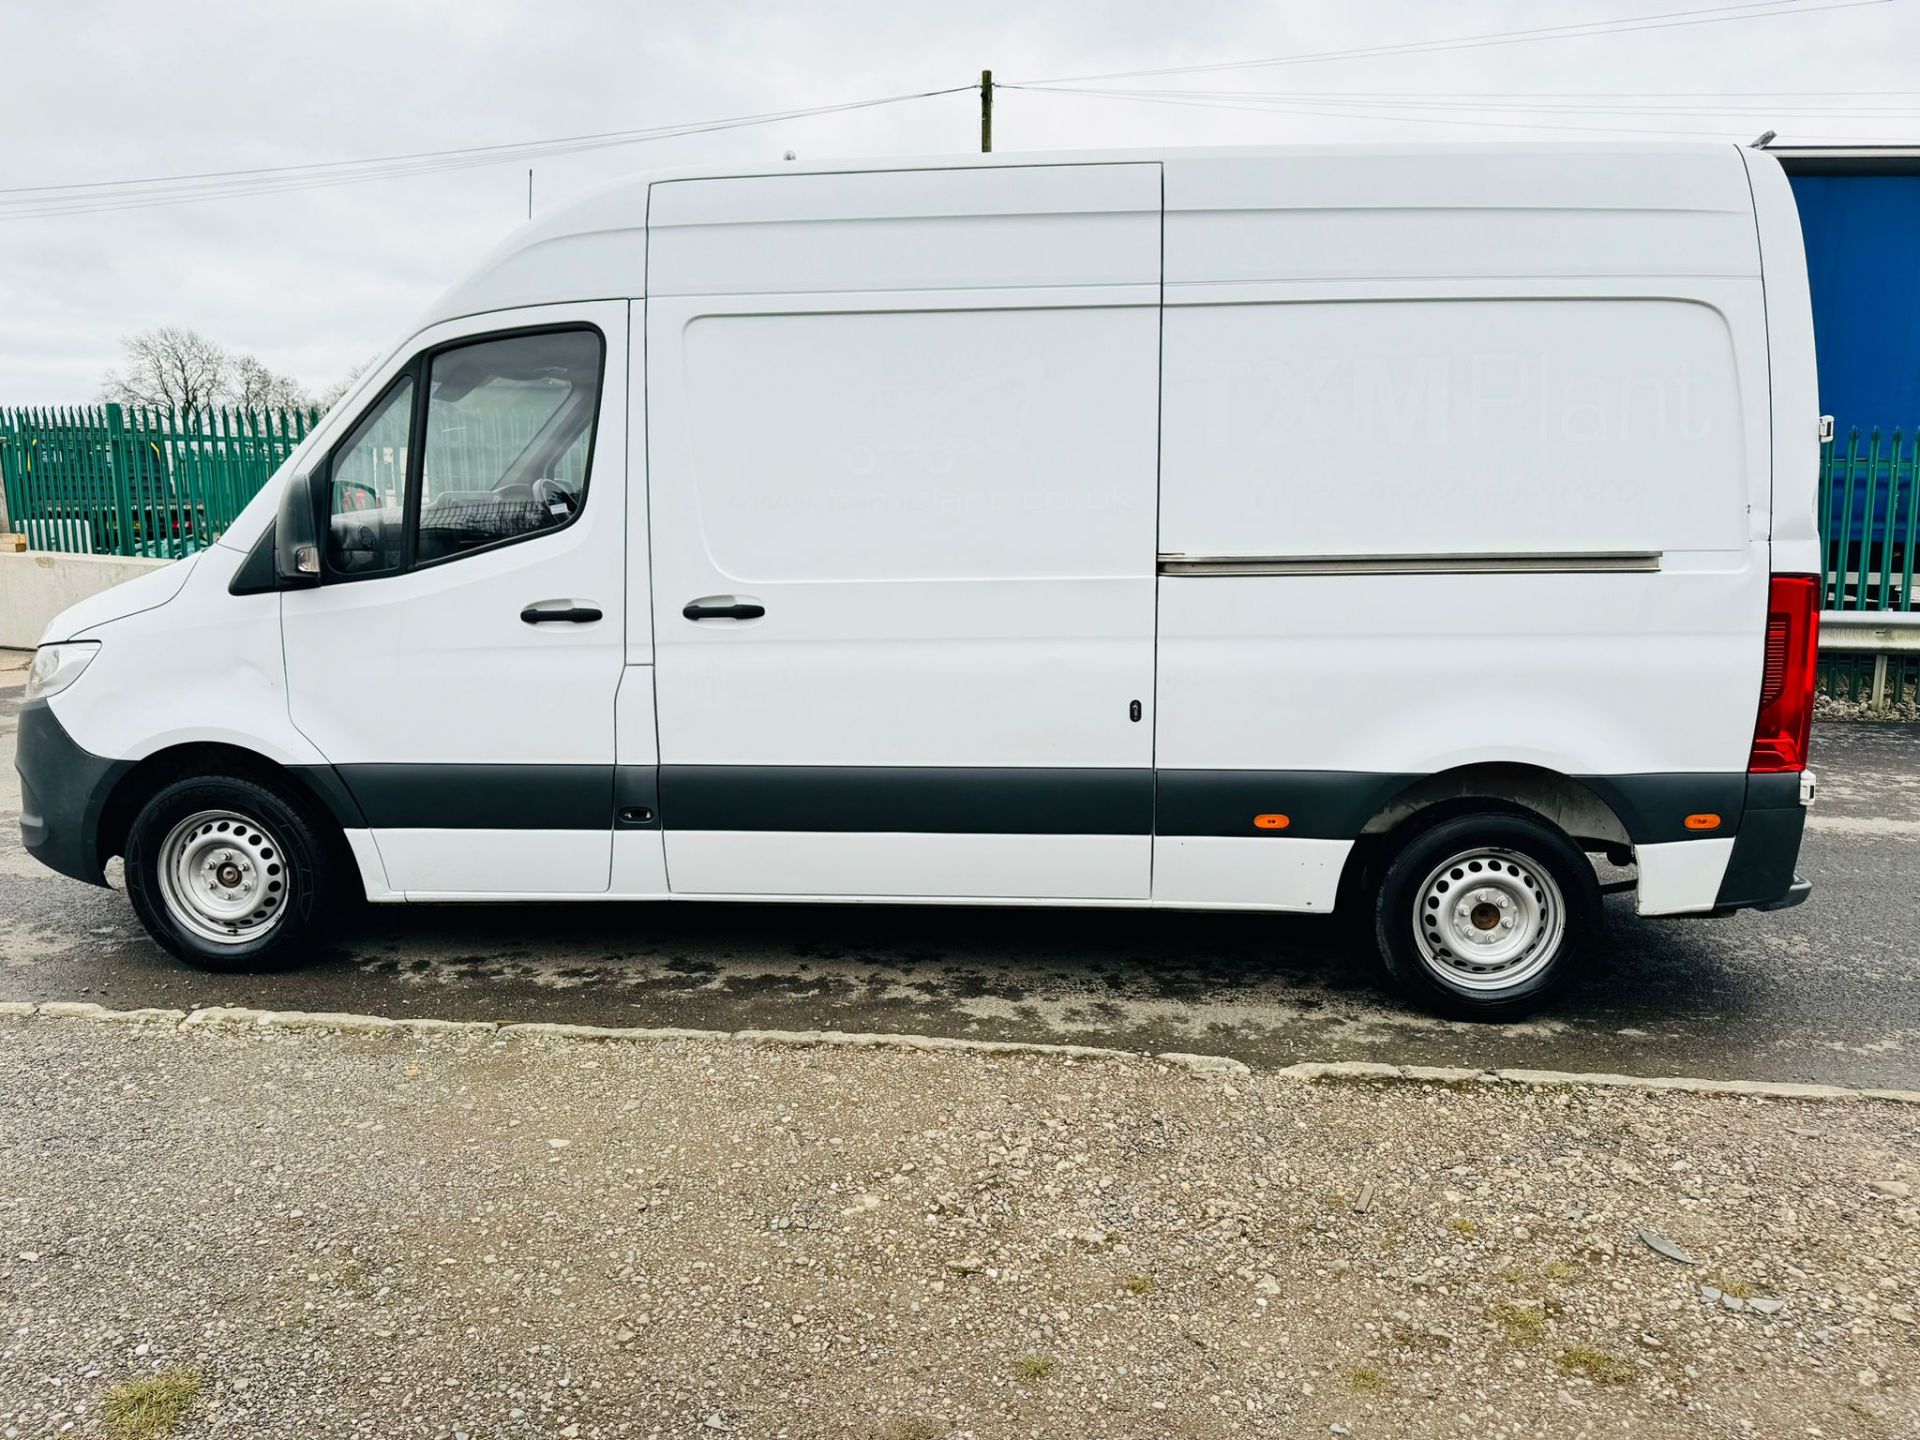 MERCEDES SPRINTER 314CDI MWB HI ROOF - 2019 19 Reg - 1 Owner From New - Euro 6 - NEW SHAPE!!. - Image 2 of 8